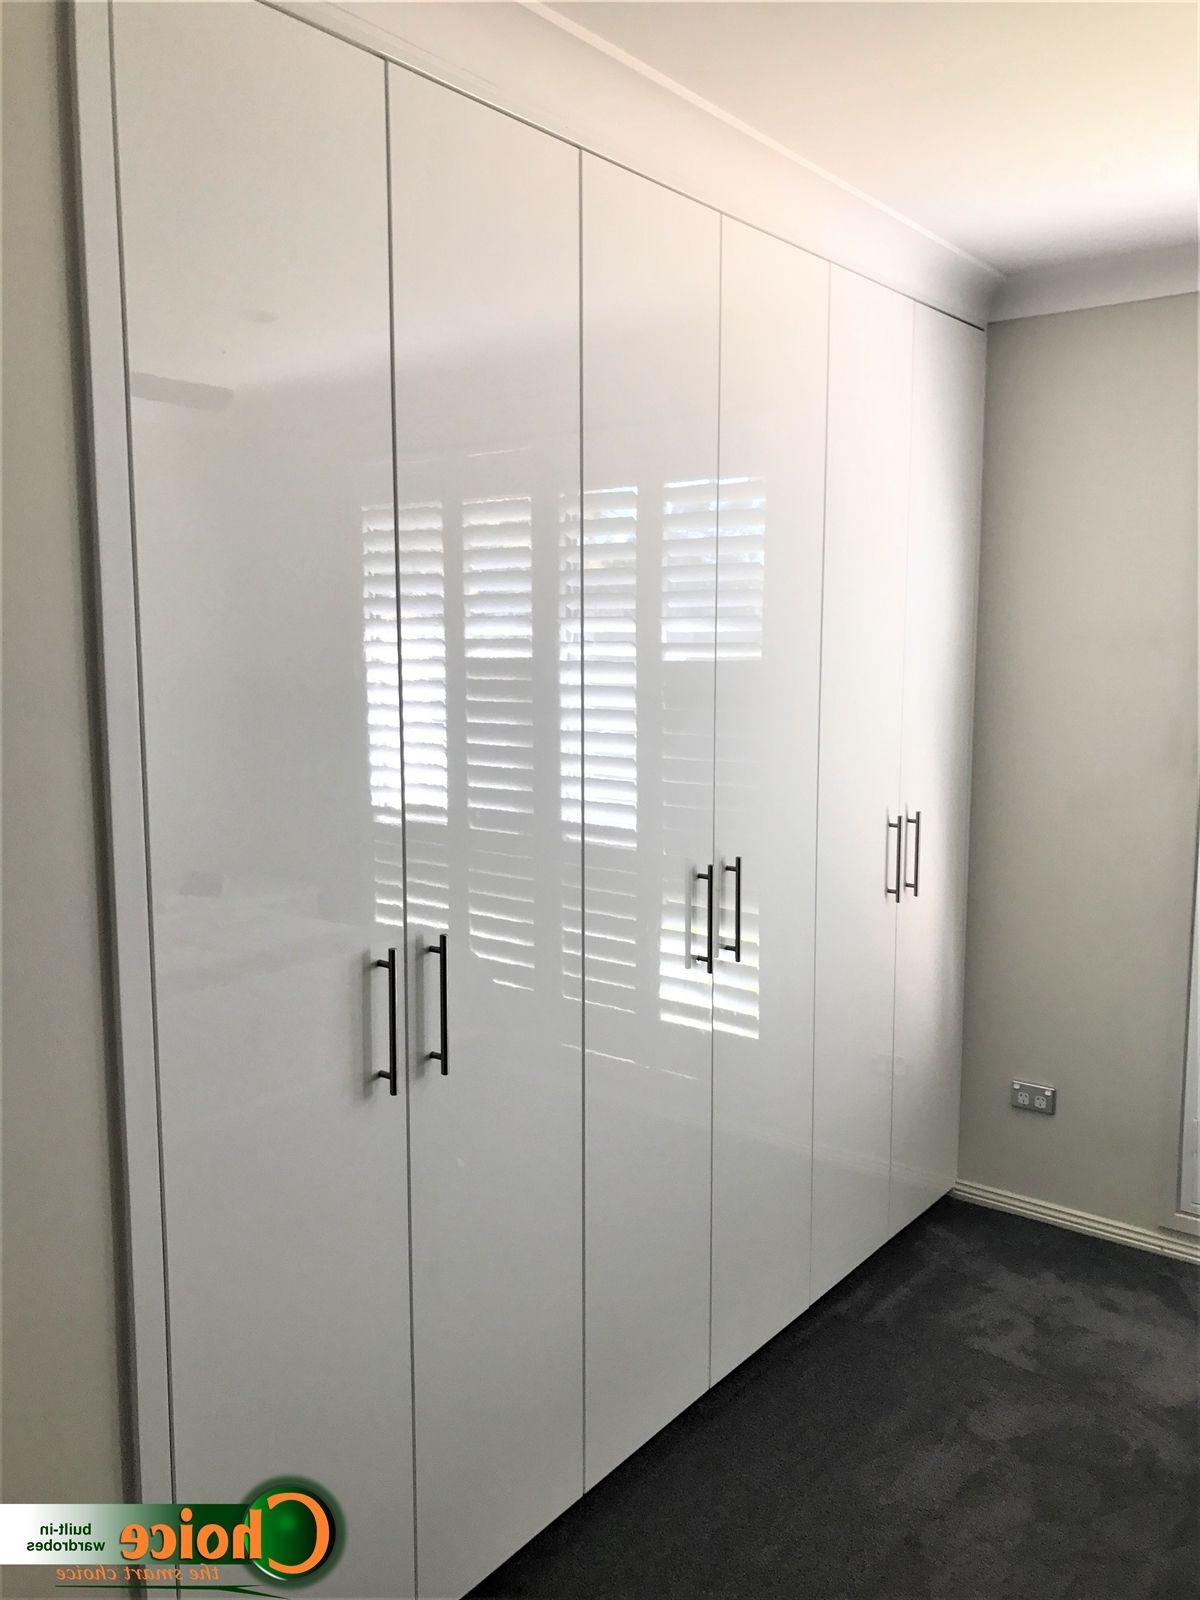 High Gloss White Pollurathane Sliding Doors  Choice Wardrobes | Built In  Wardrobes For Western Sydney  Choice Wardrobes Regarding High Gloss Doors Wardrobes (Gallery 8 of 20)